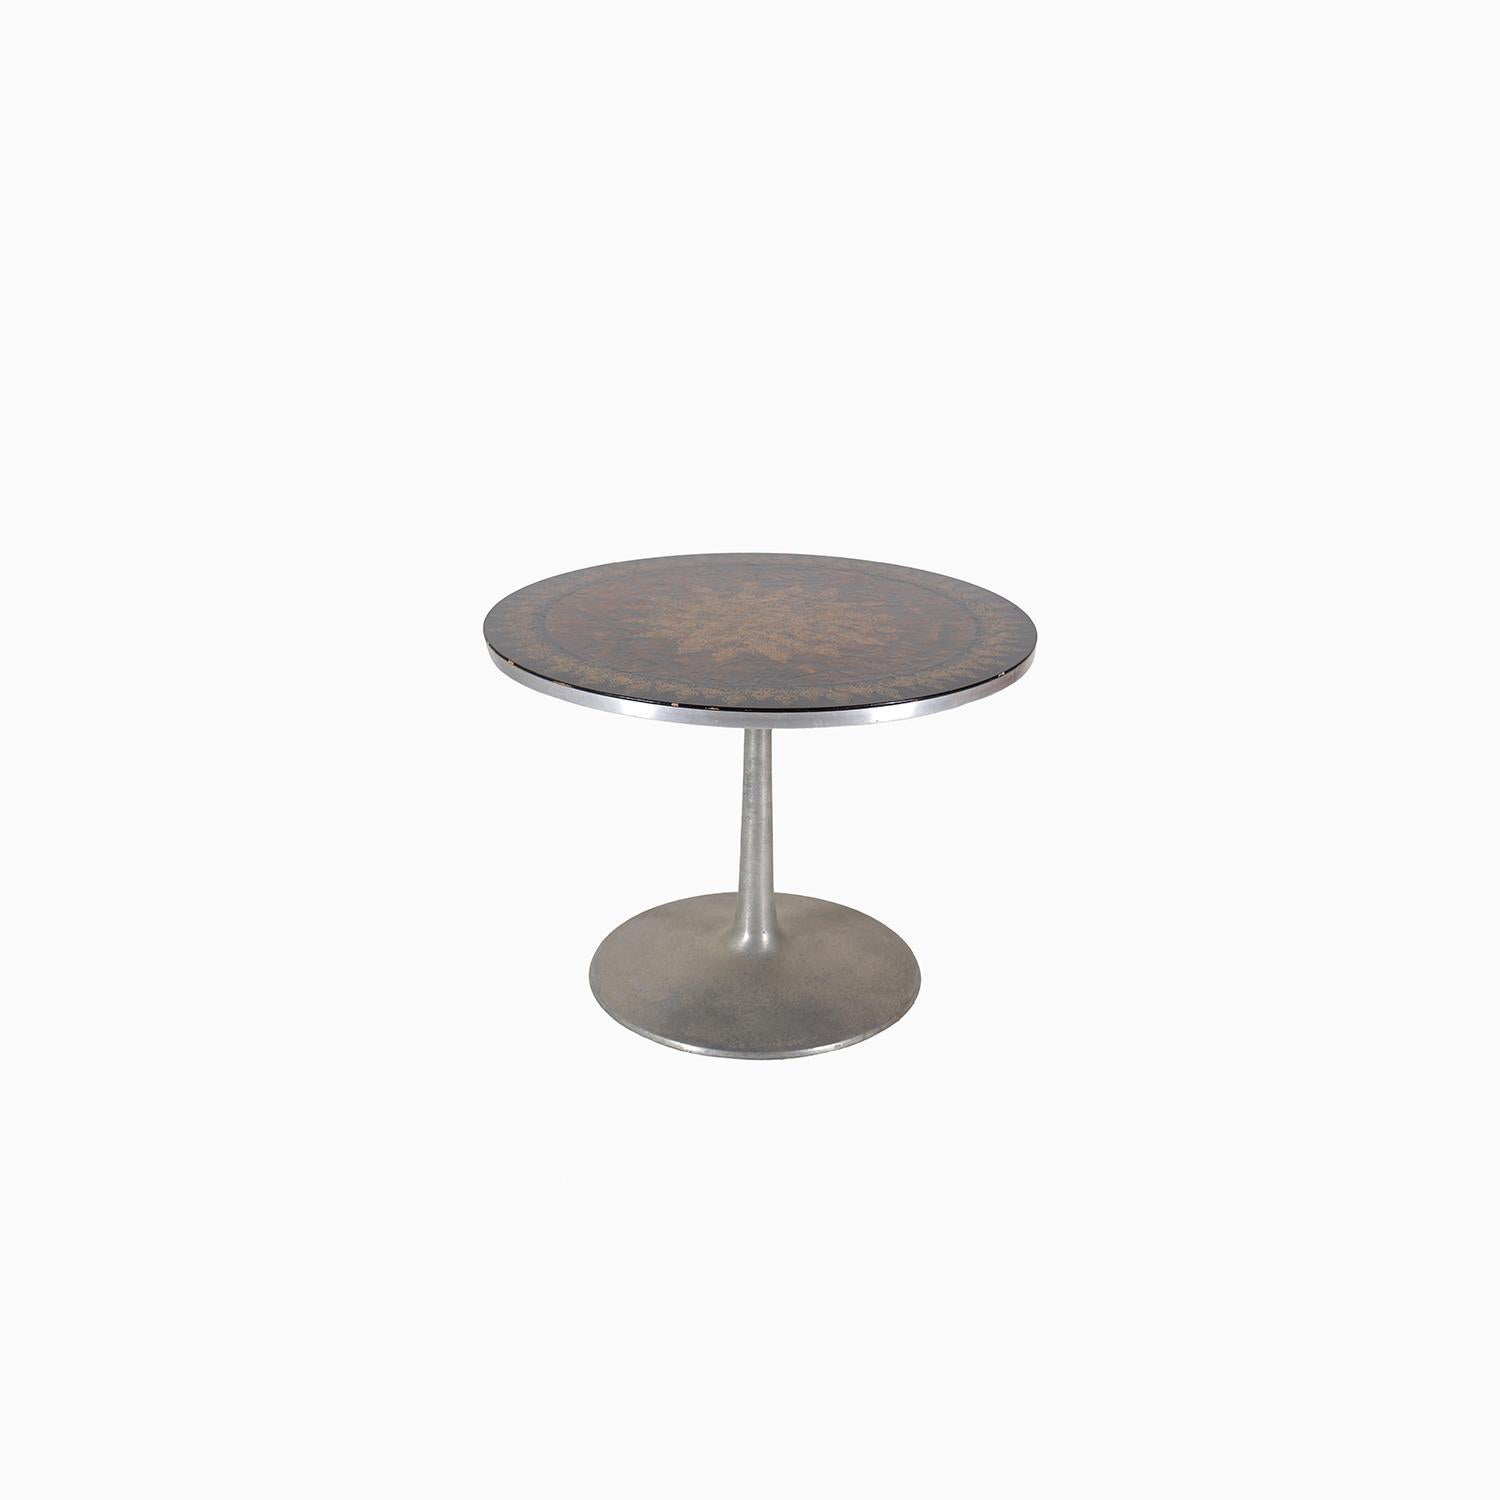 A Danish Modern tulip table made of aluminum and hand painted by Susanne Feljdose. Produced by Cado. 

Professional, skilled furniture restoration is an integral part of what we do every day. Our goal is to provide beautiful, functional furniture